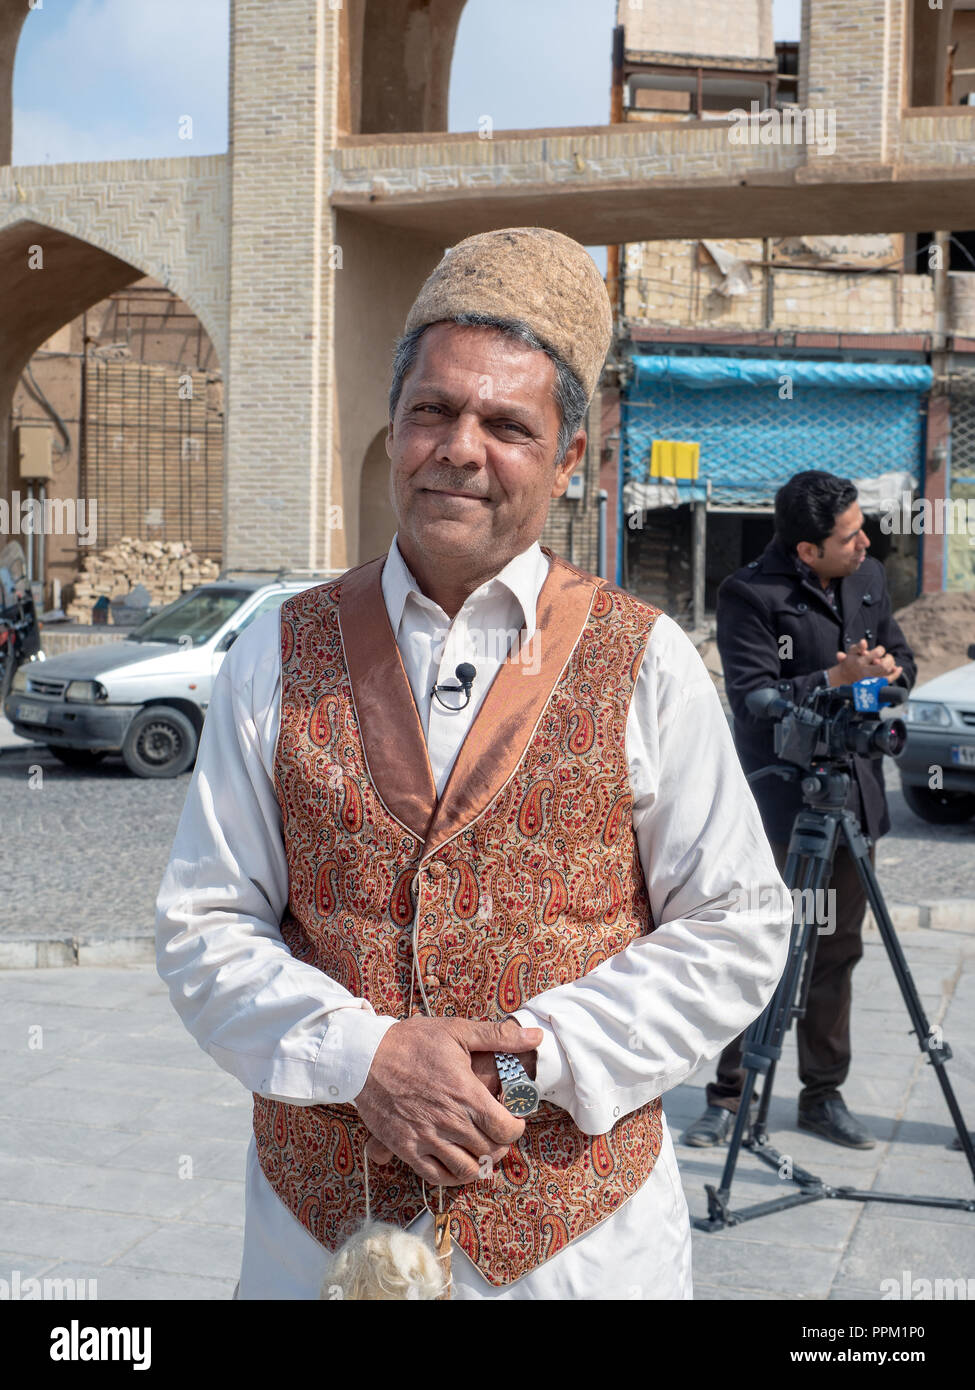 Yazd, Iran - March 7, 2017 : portrait of local TV host wearing traditional clothes Stock Photo